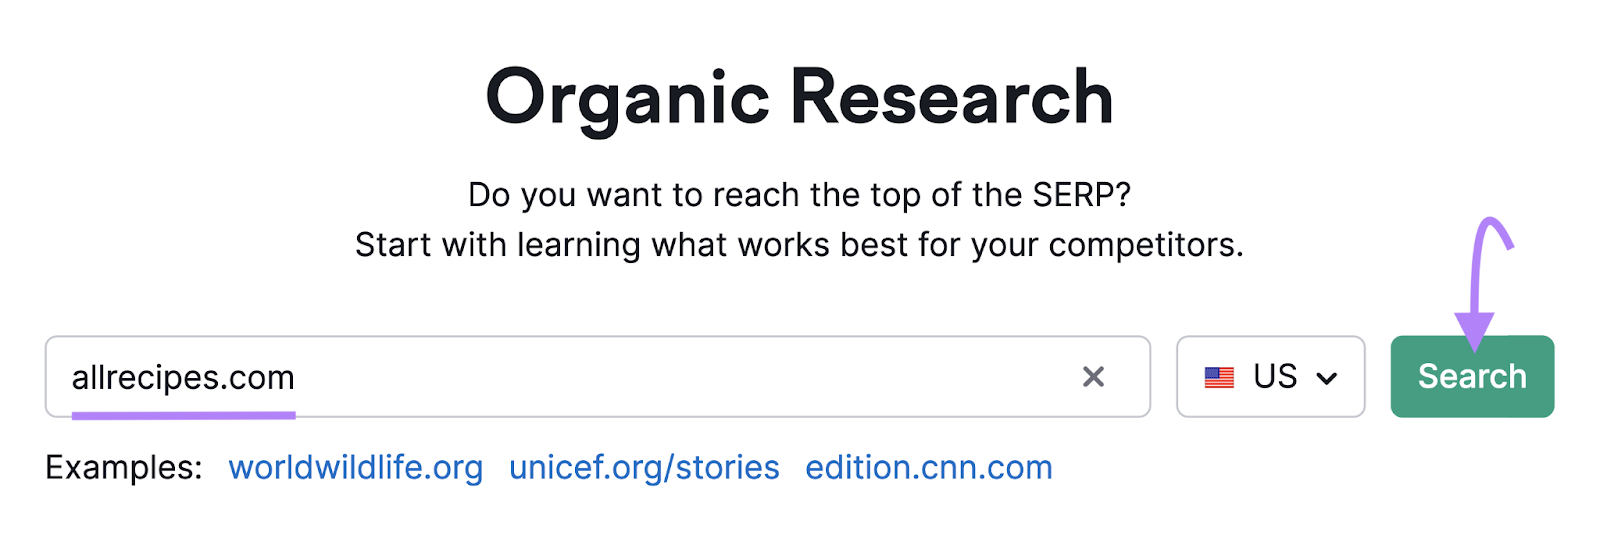 "allrecipes.com" entered into the Organic Research tool search box